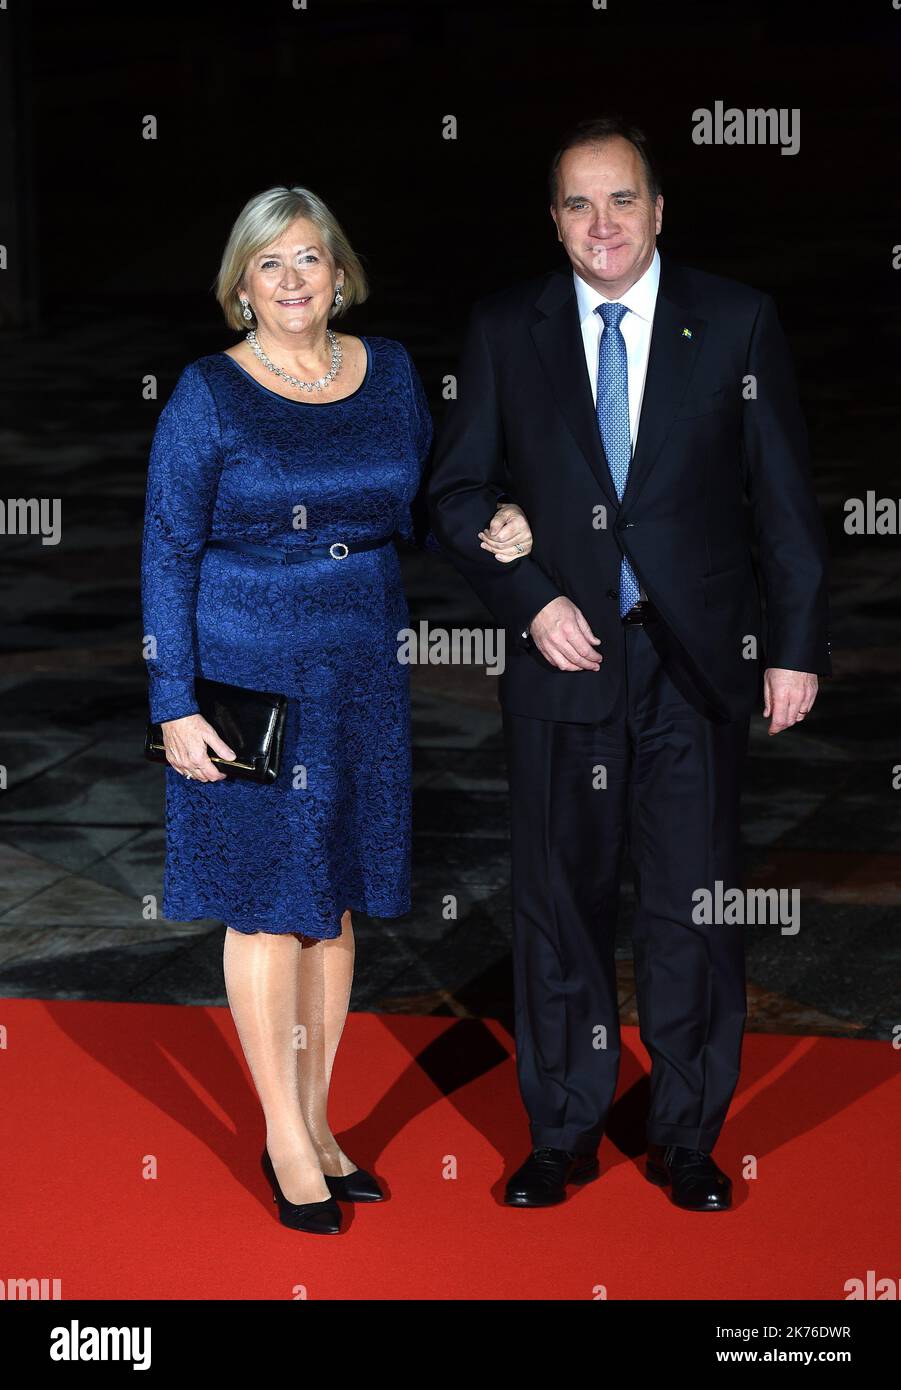 Stefan Löfven et sa femme Ulla Löfven attending at State diner during the ceremonies marking the 100th anniversary of the 11 November 1918 armistice, ending World War I  at the Musee d'Orsay in Paris on November 10, 2018  Stock Photo